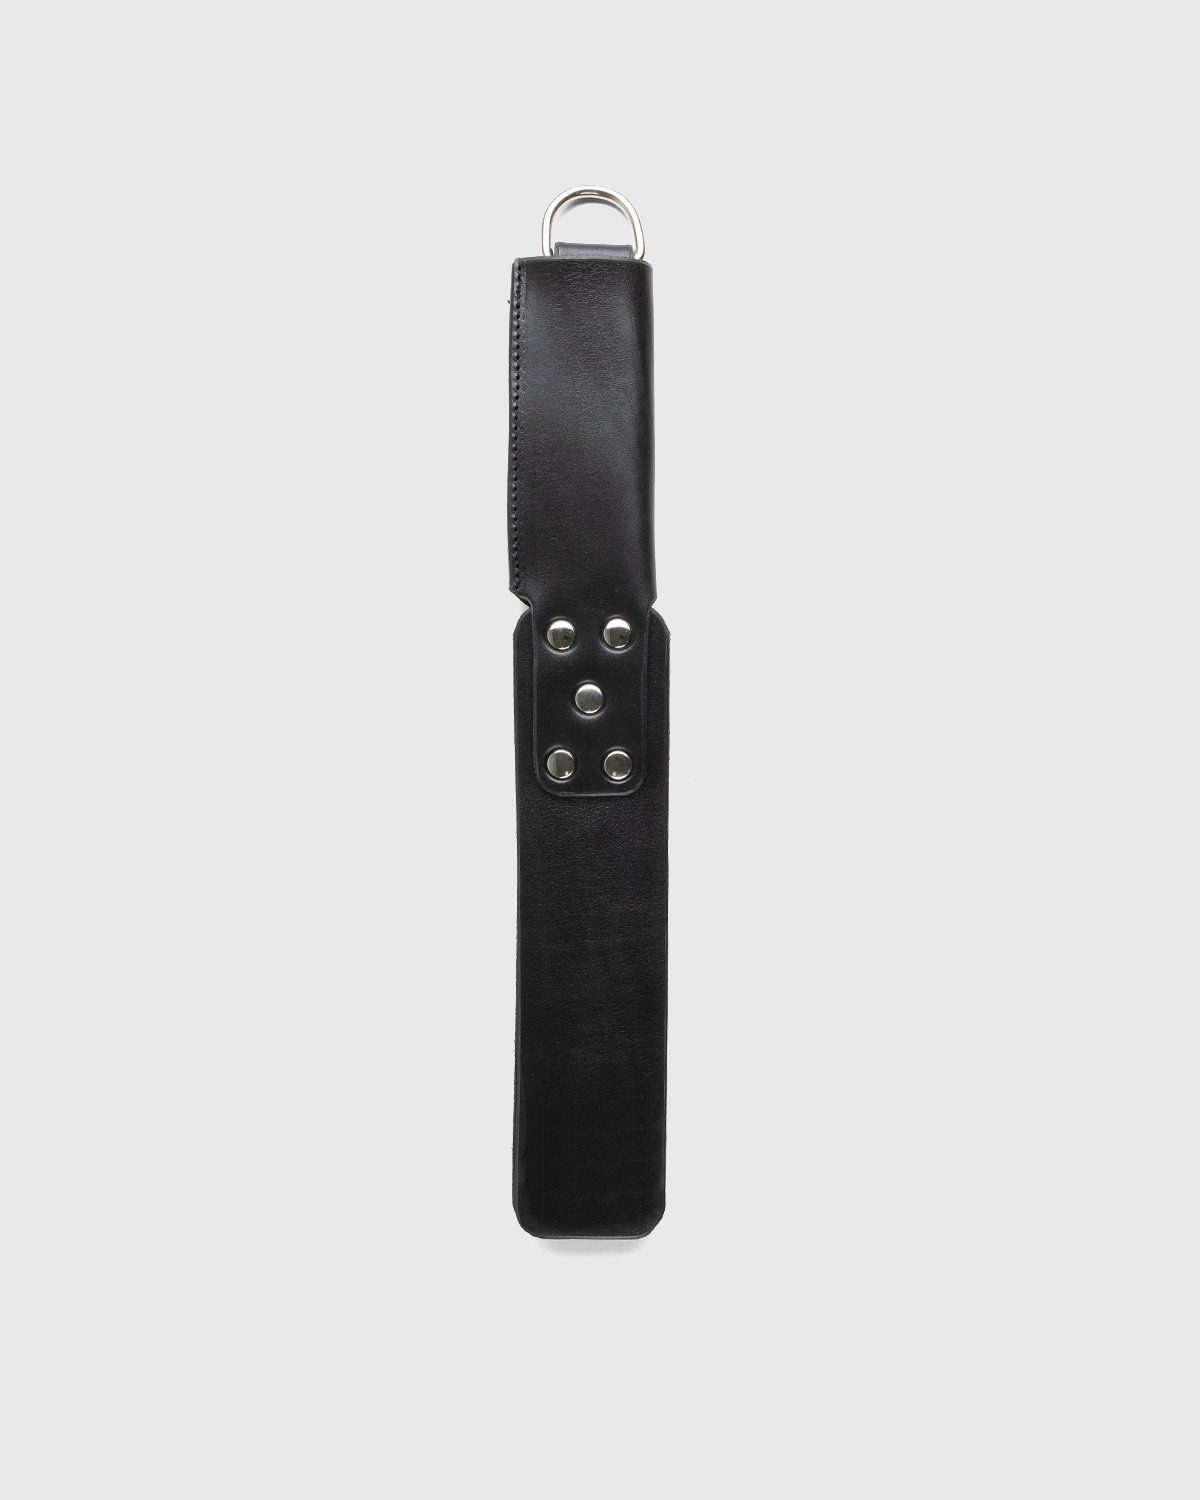 Highsnobiety x Butcherei Lindinger – Double Leather Paddle Black - Accessories - Black - Image 4